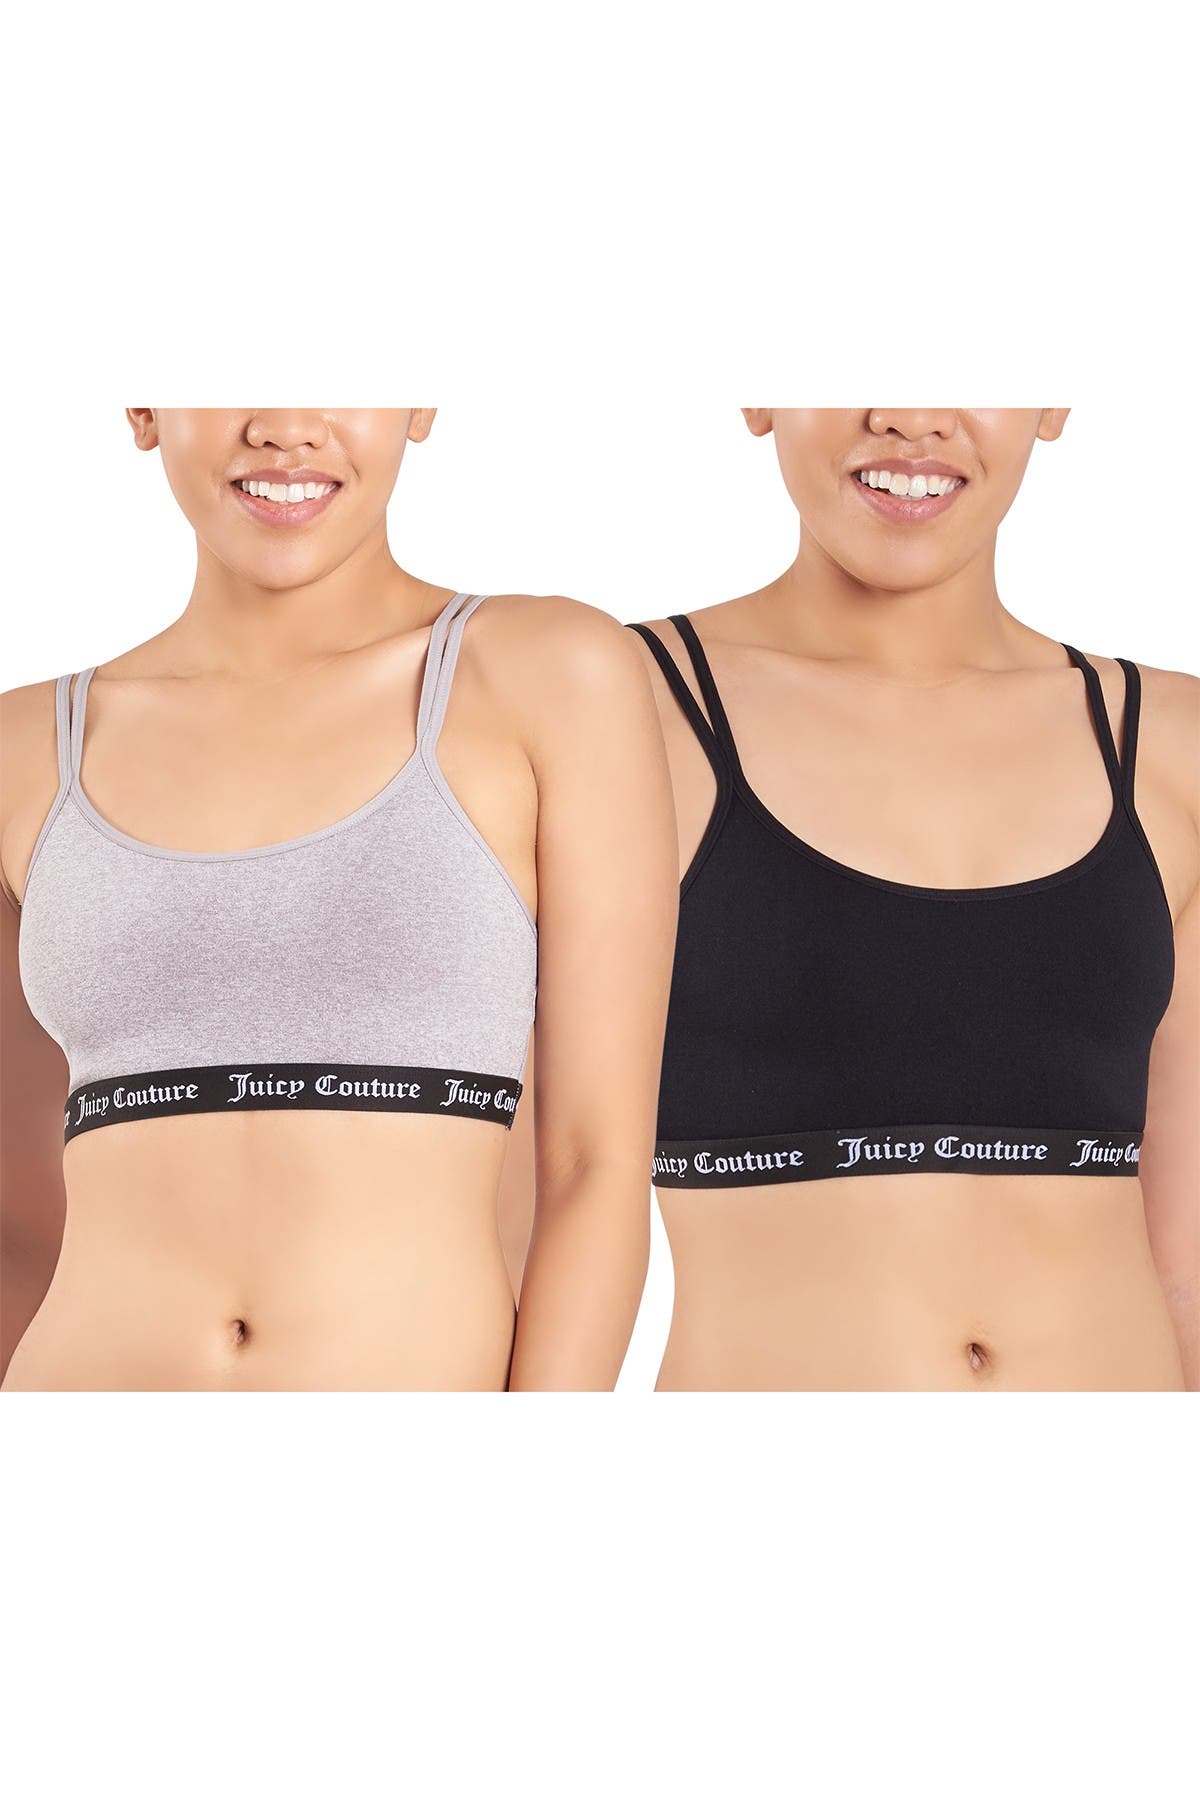 Juicy Couture Seamless Bralette In Light Heather Grey/ Black